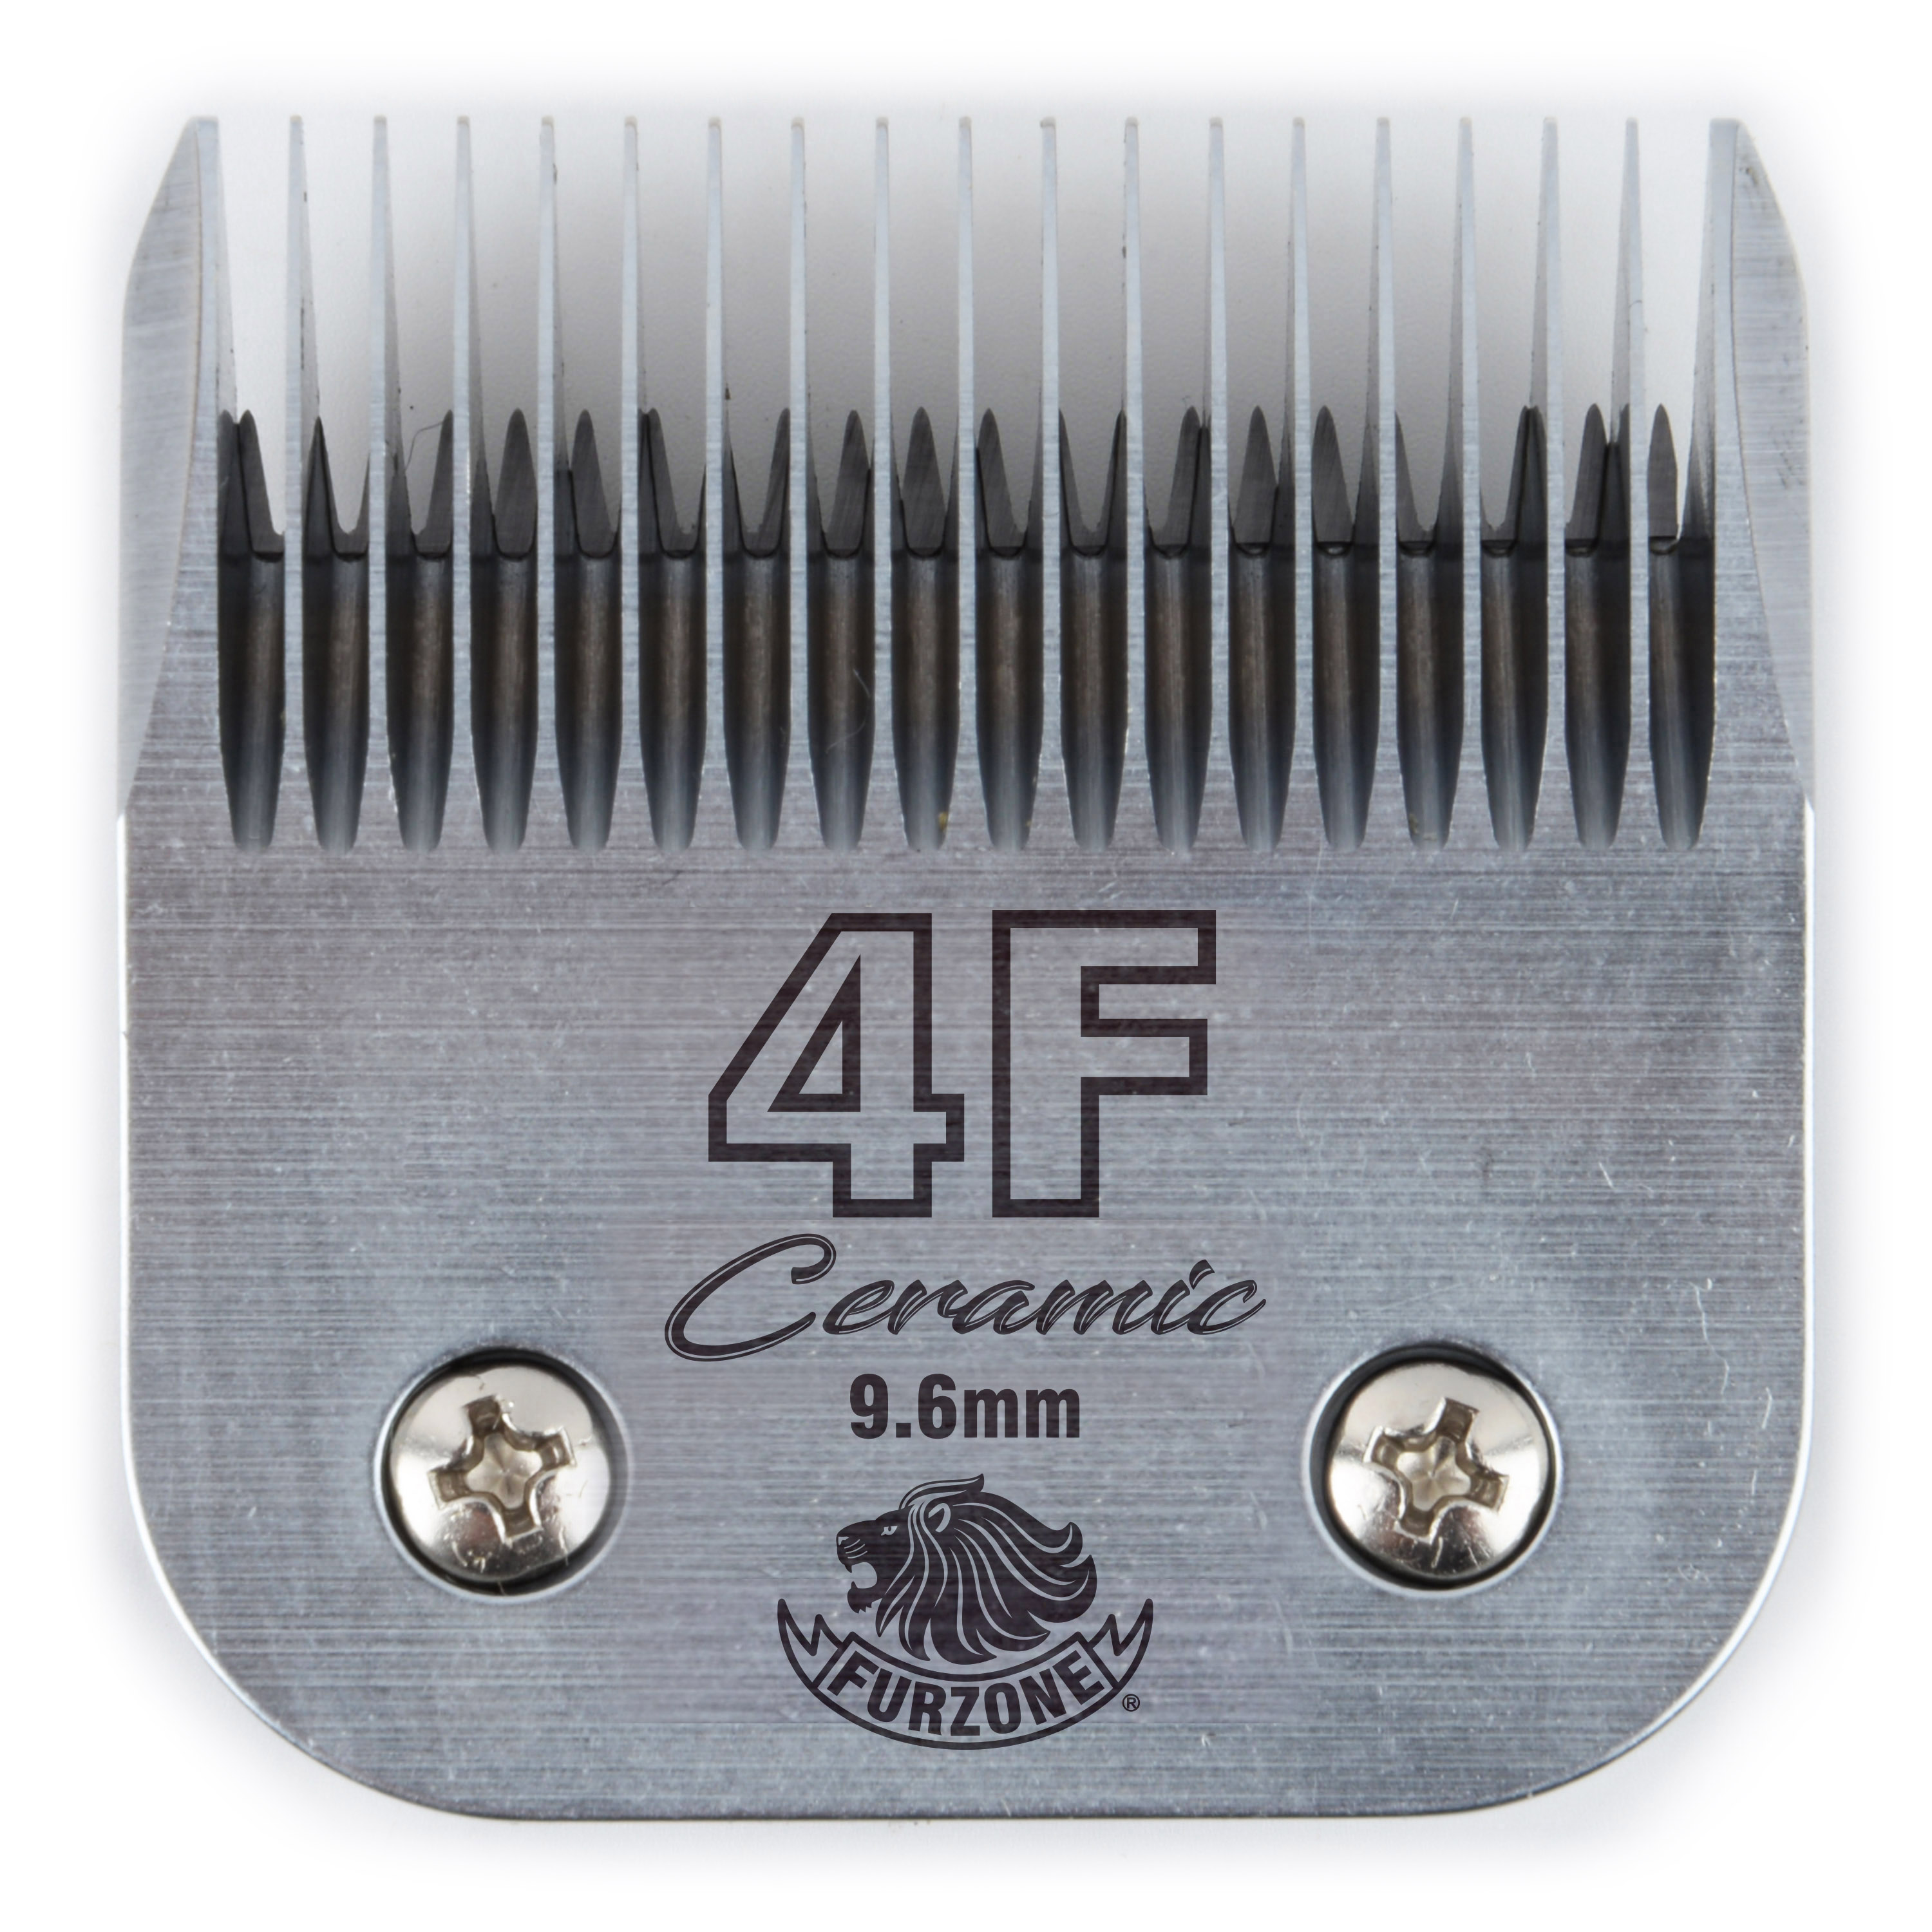 Furzone #4F-9.6mm-Full Teeth Professional A5 Detachable Blade - Made Of High-Tech Ceramic Materials